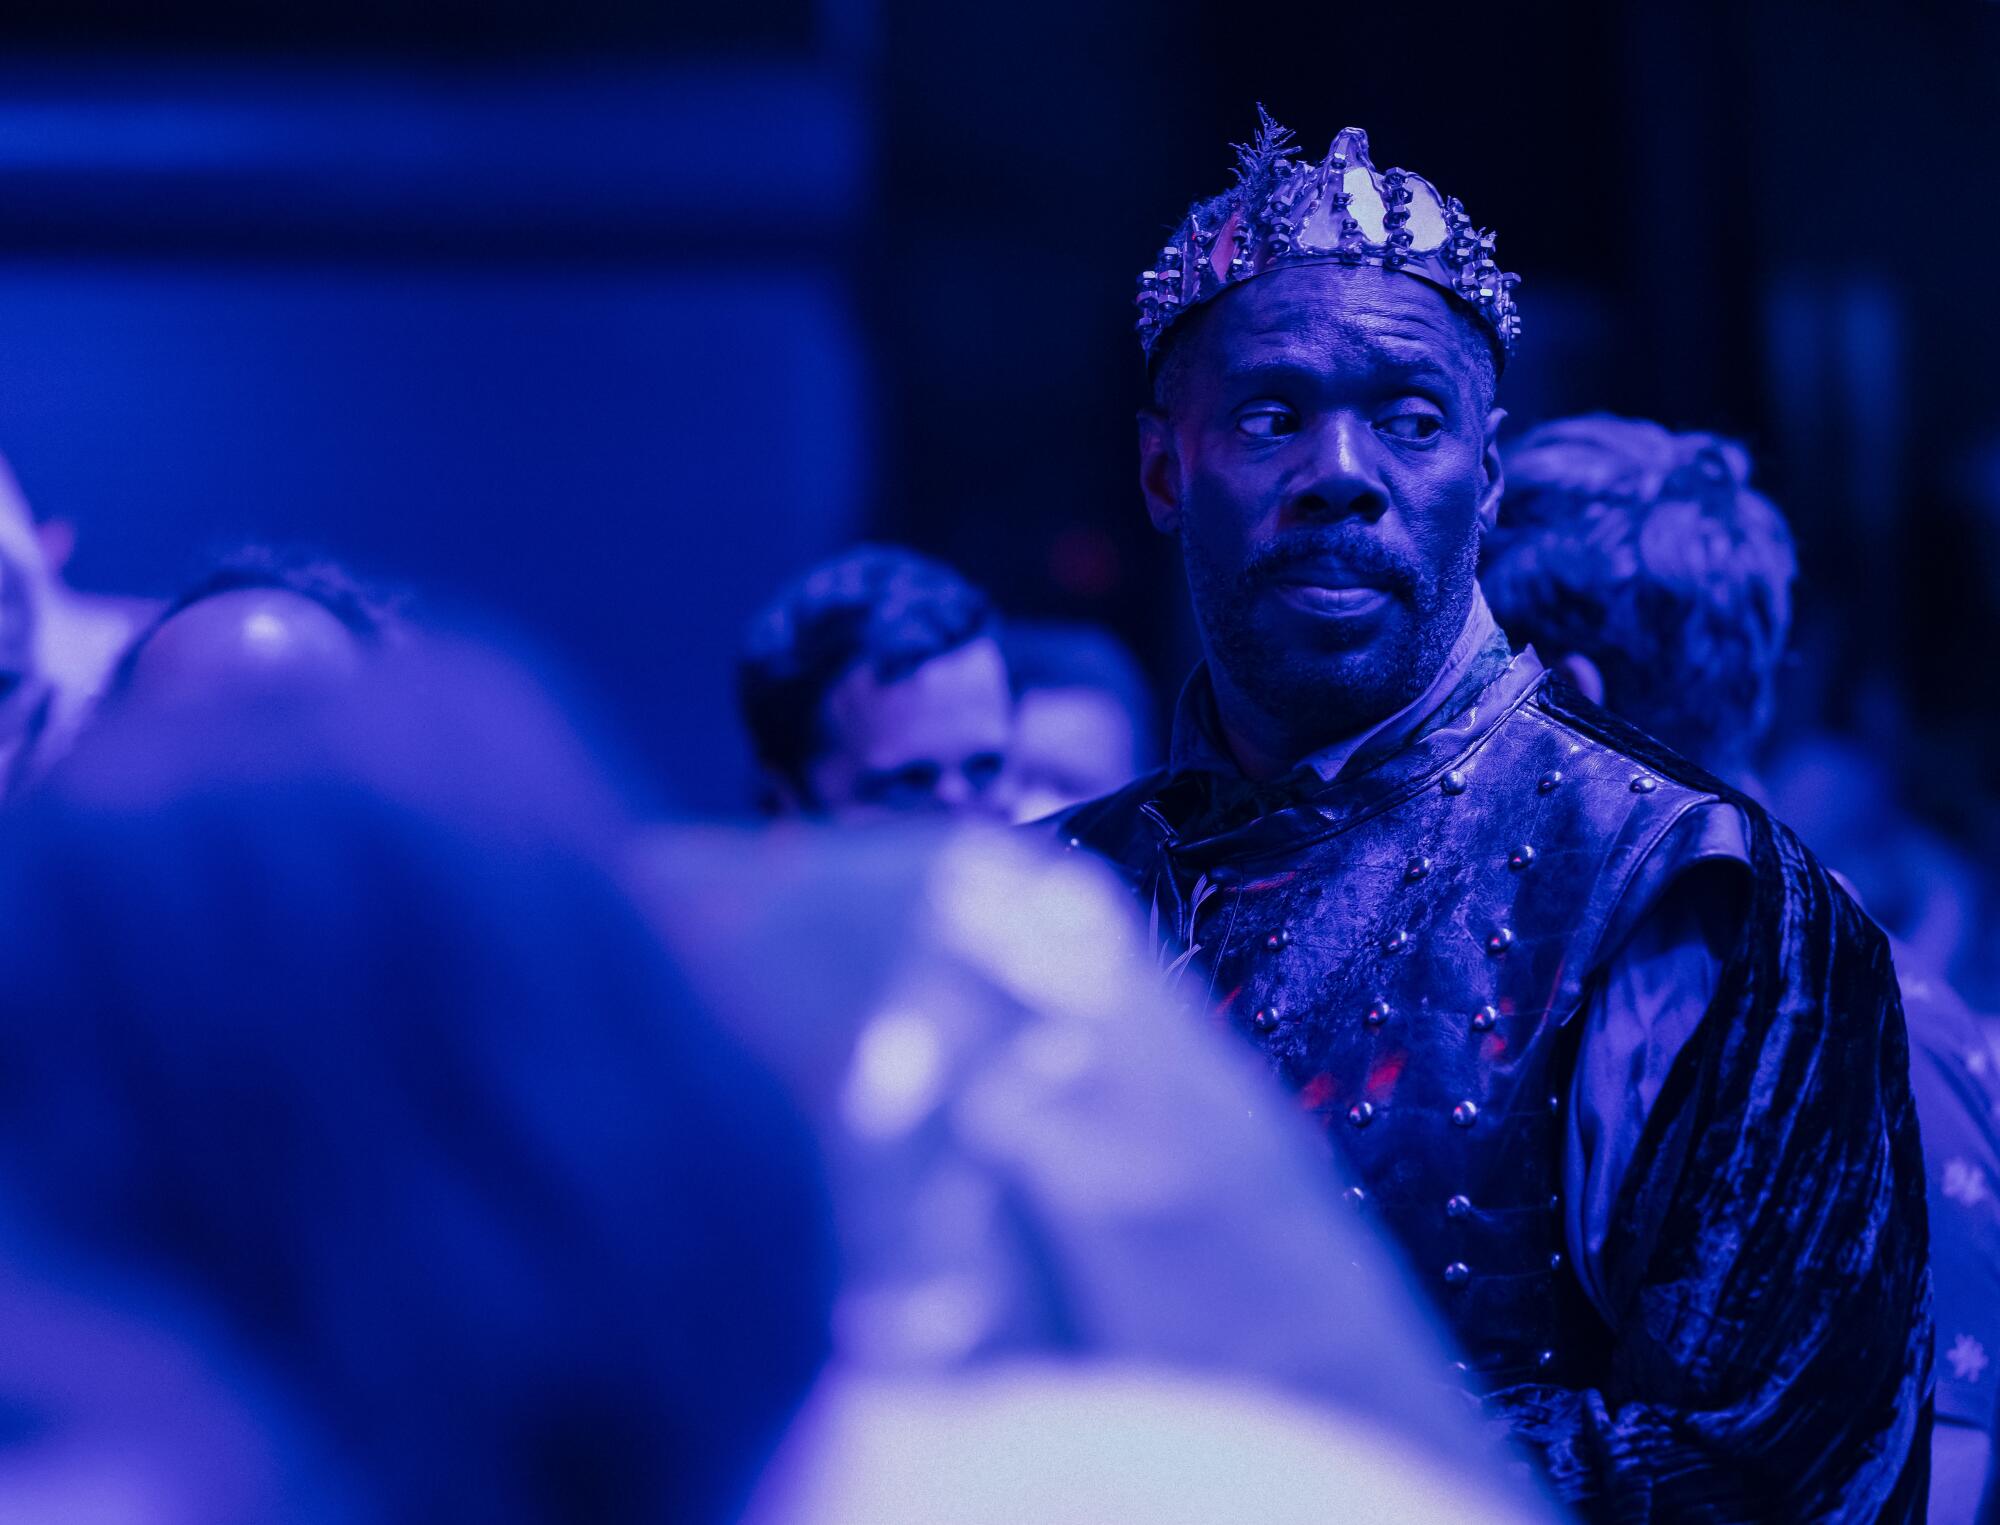 A performer in a crown watches.